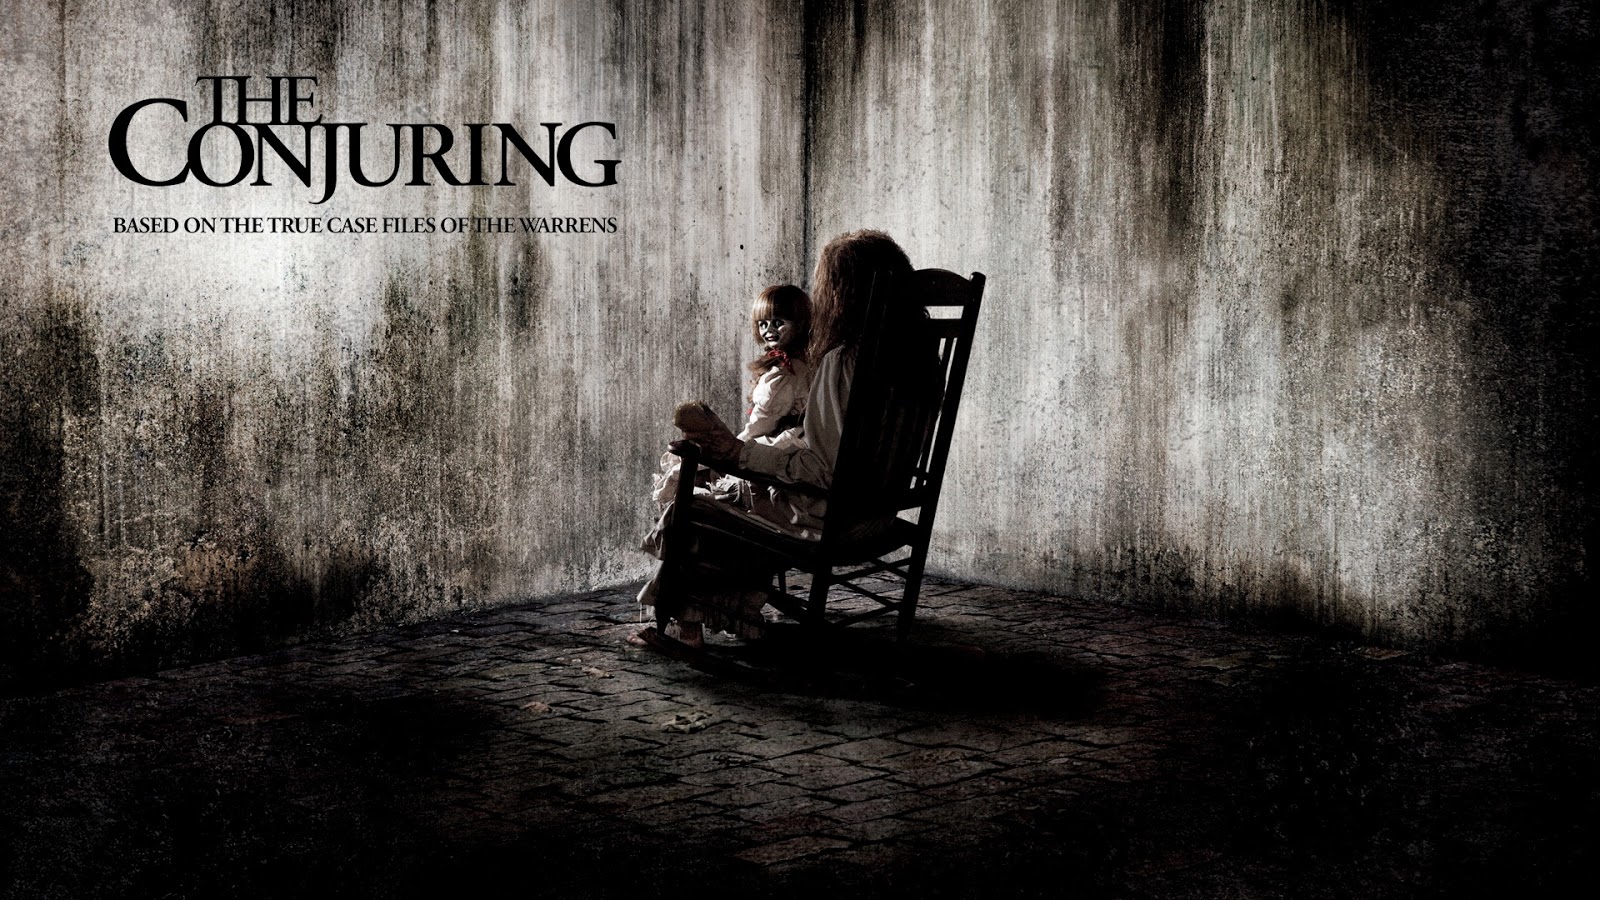 Horror The Conjuring Full Movie | One Popular